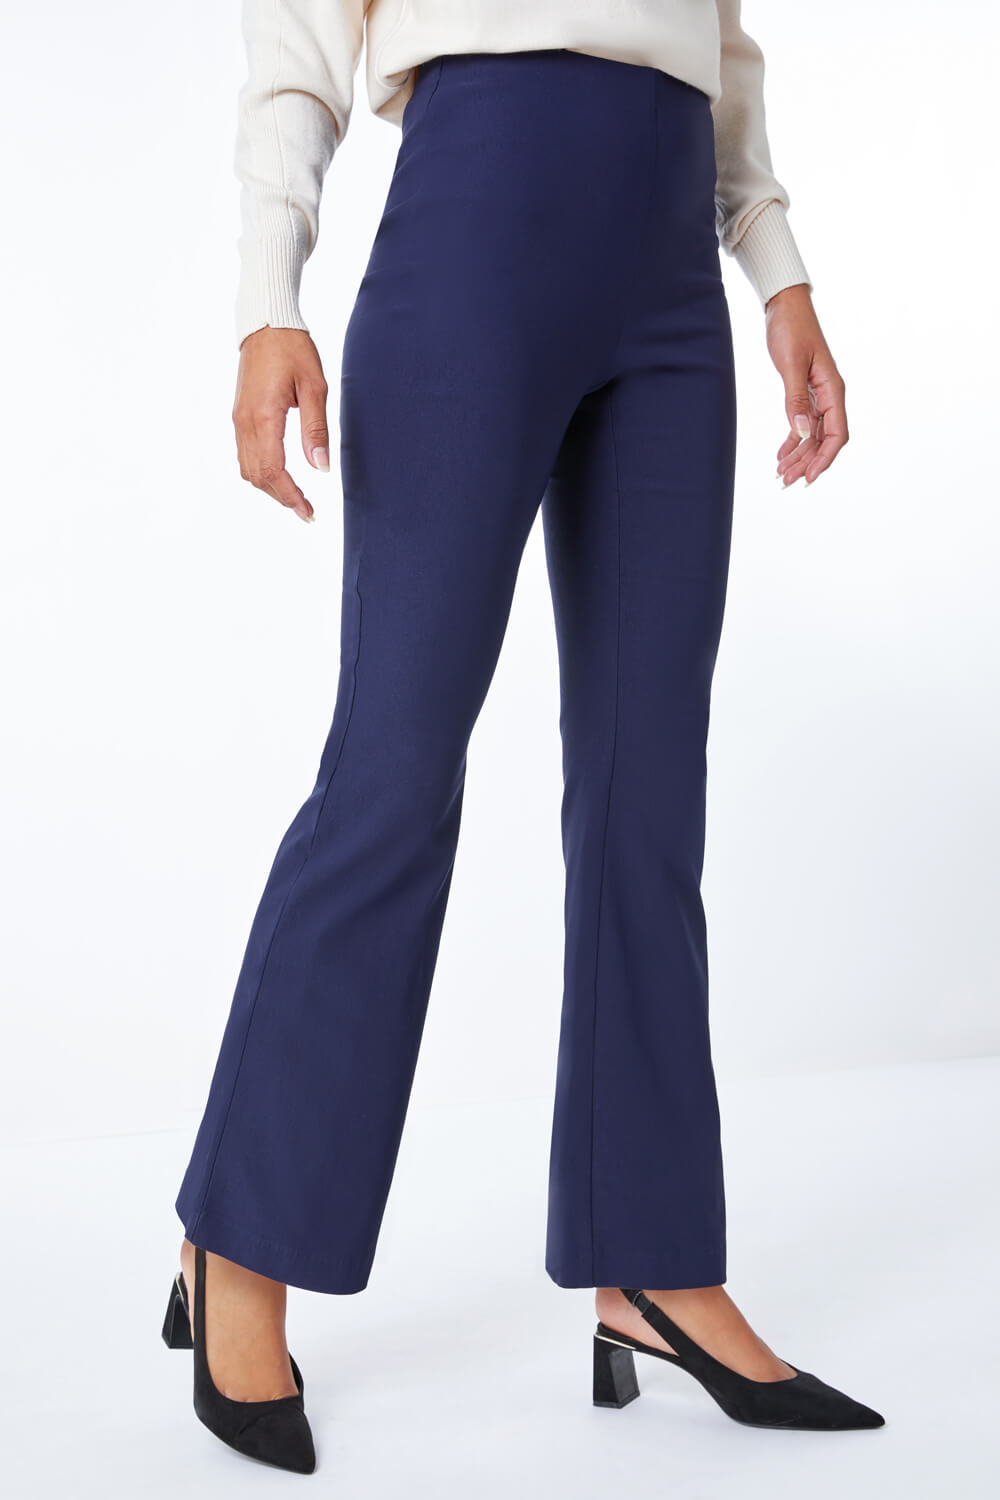 Navy  Full Length Boot Cut Stretch Trouser, Image 3 of 4